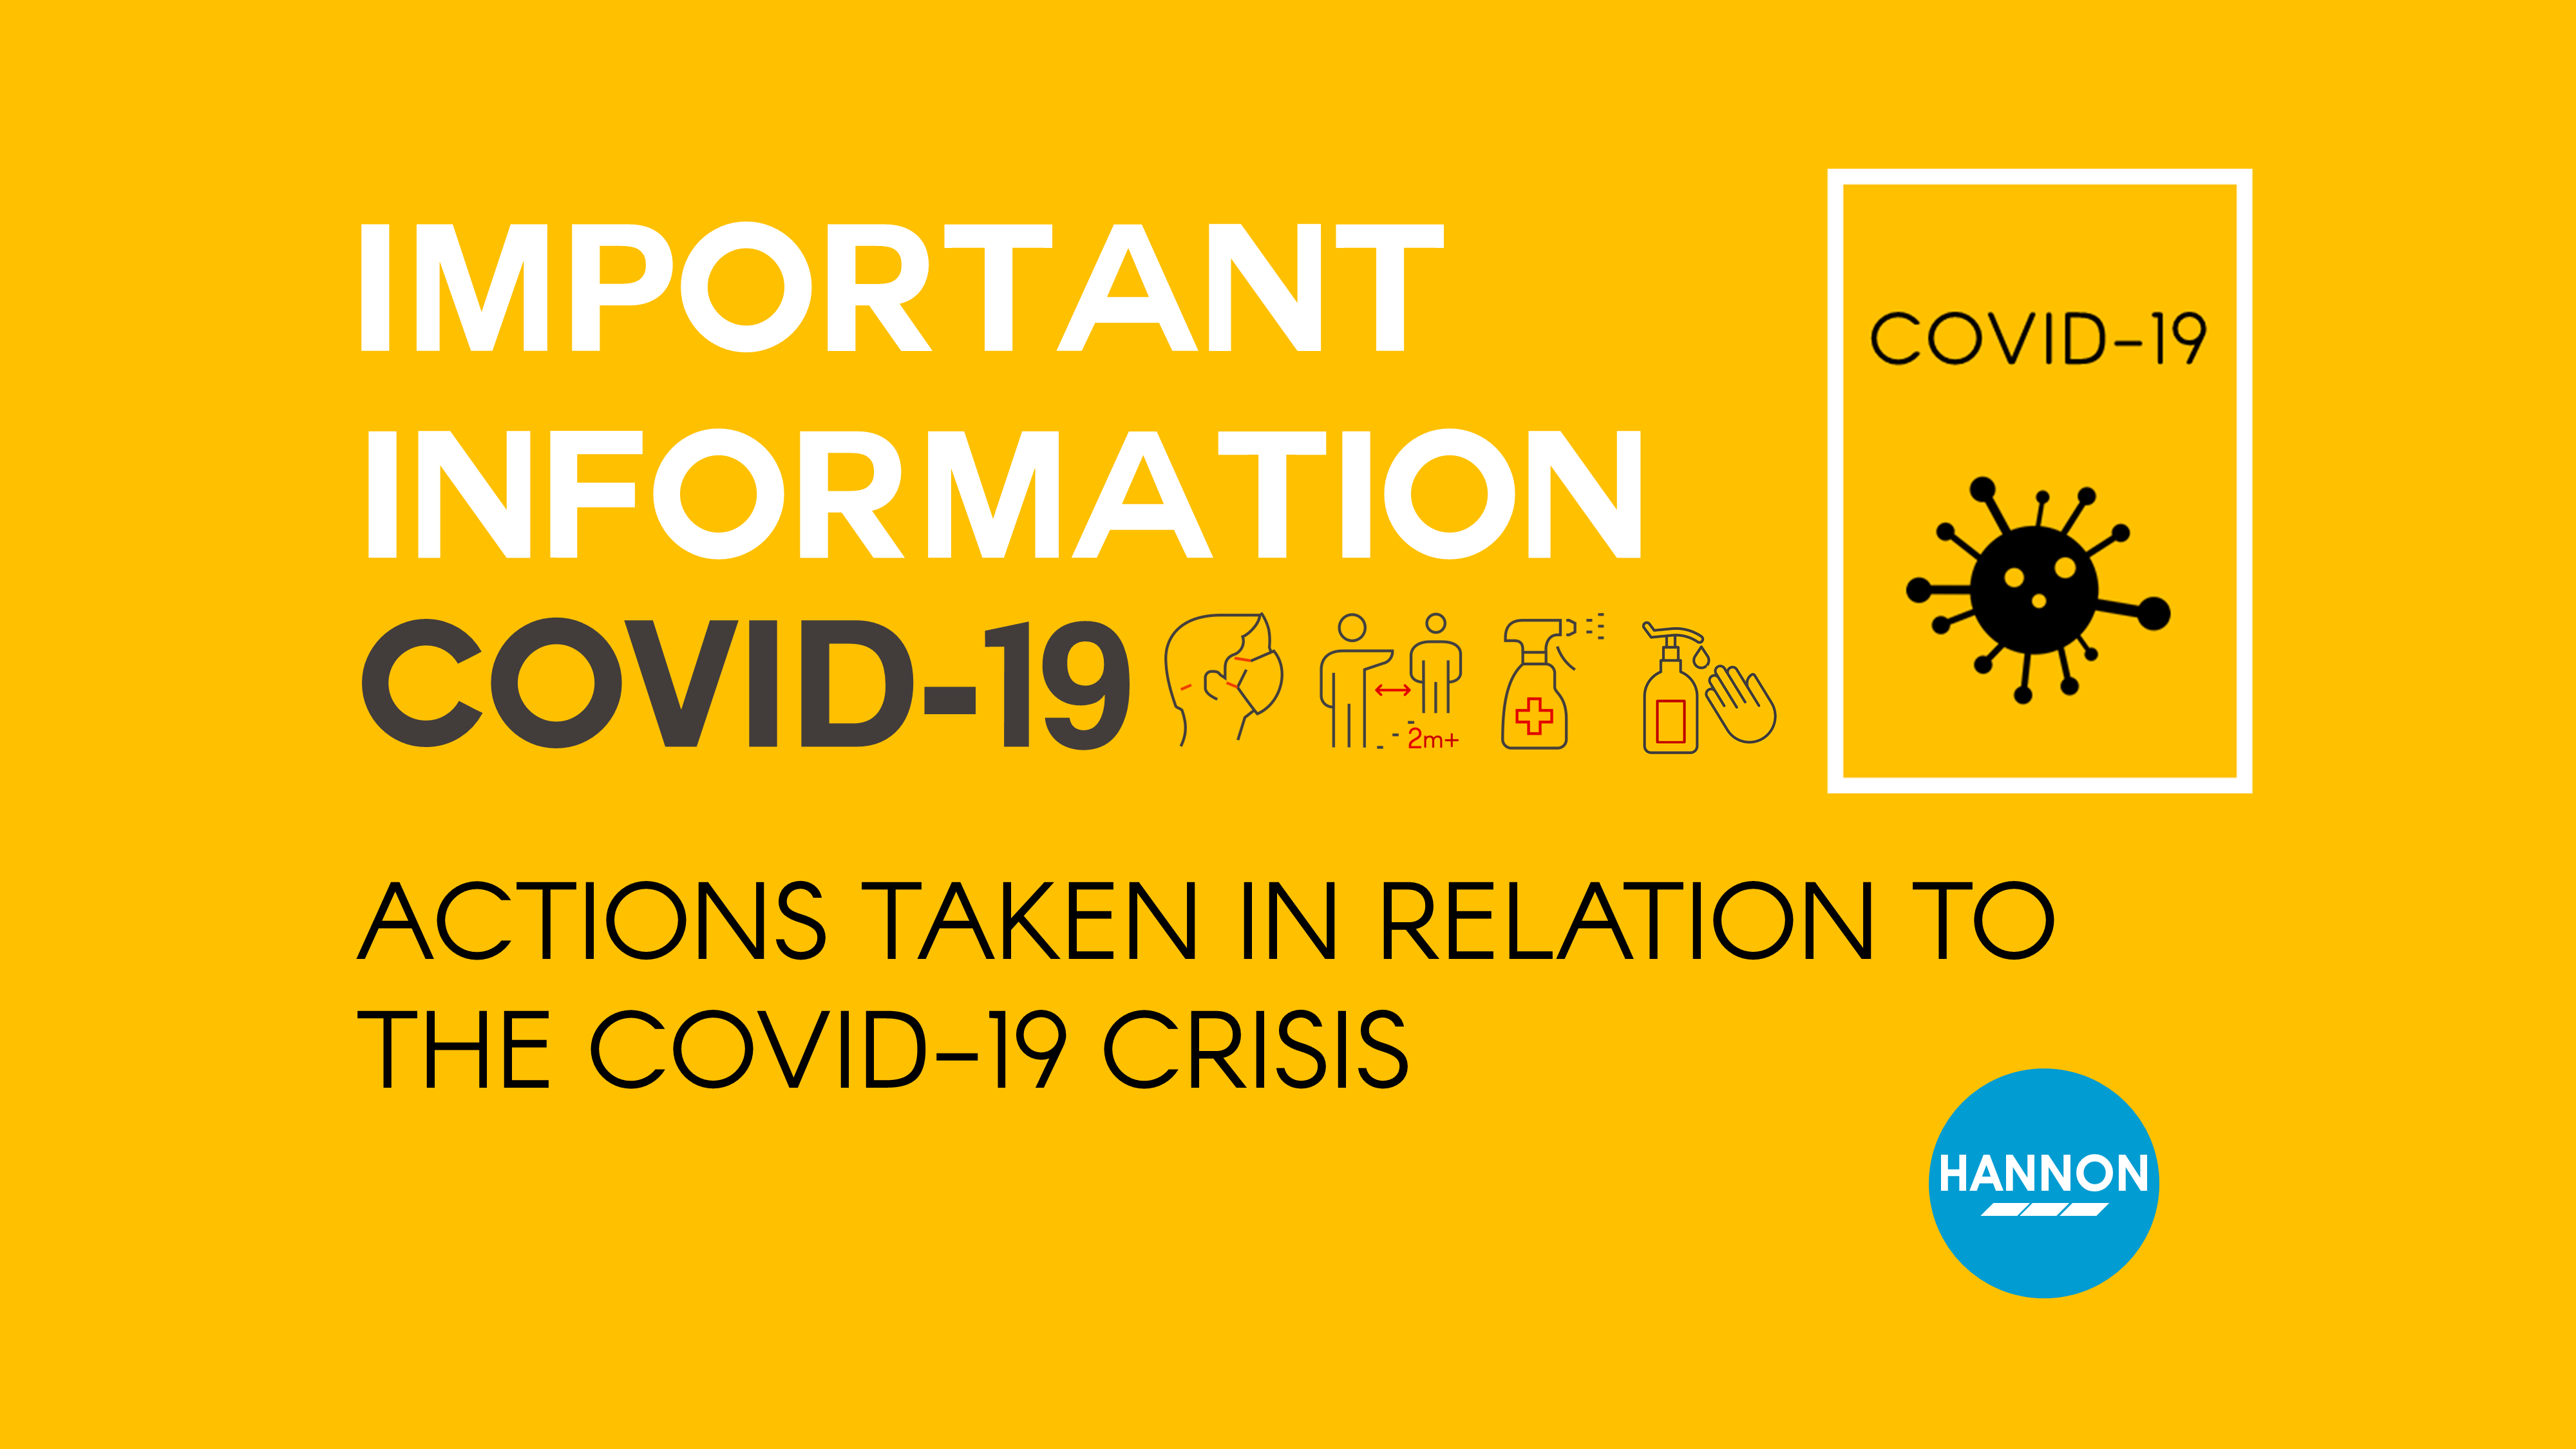 Actions taken in relation to the Covid-19 crisis